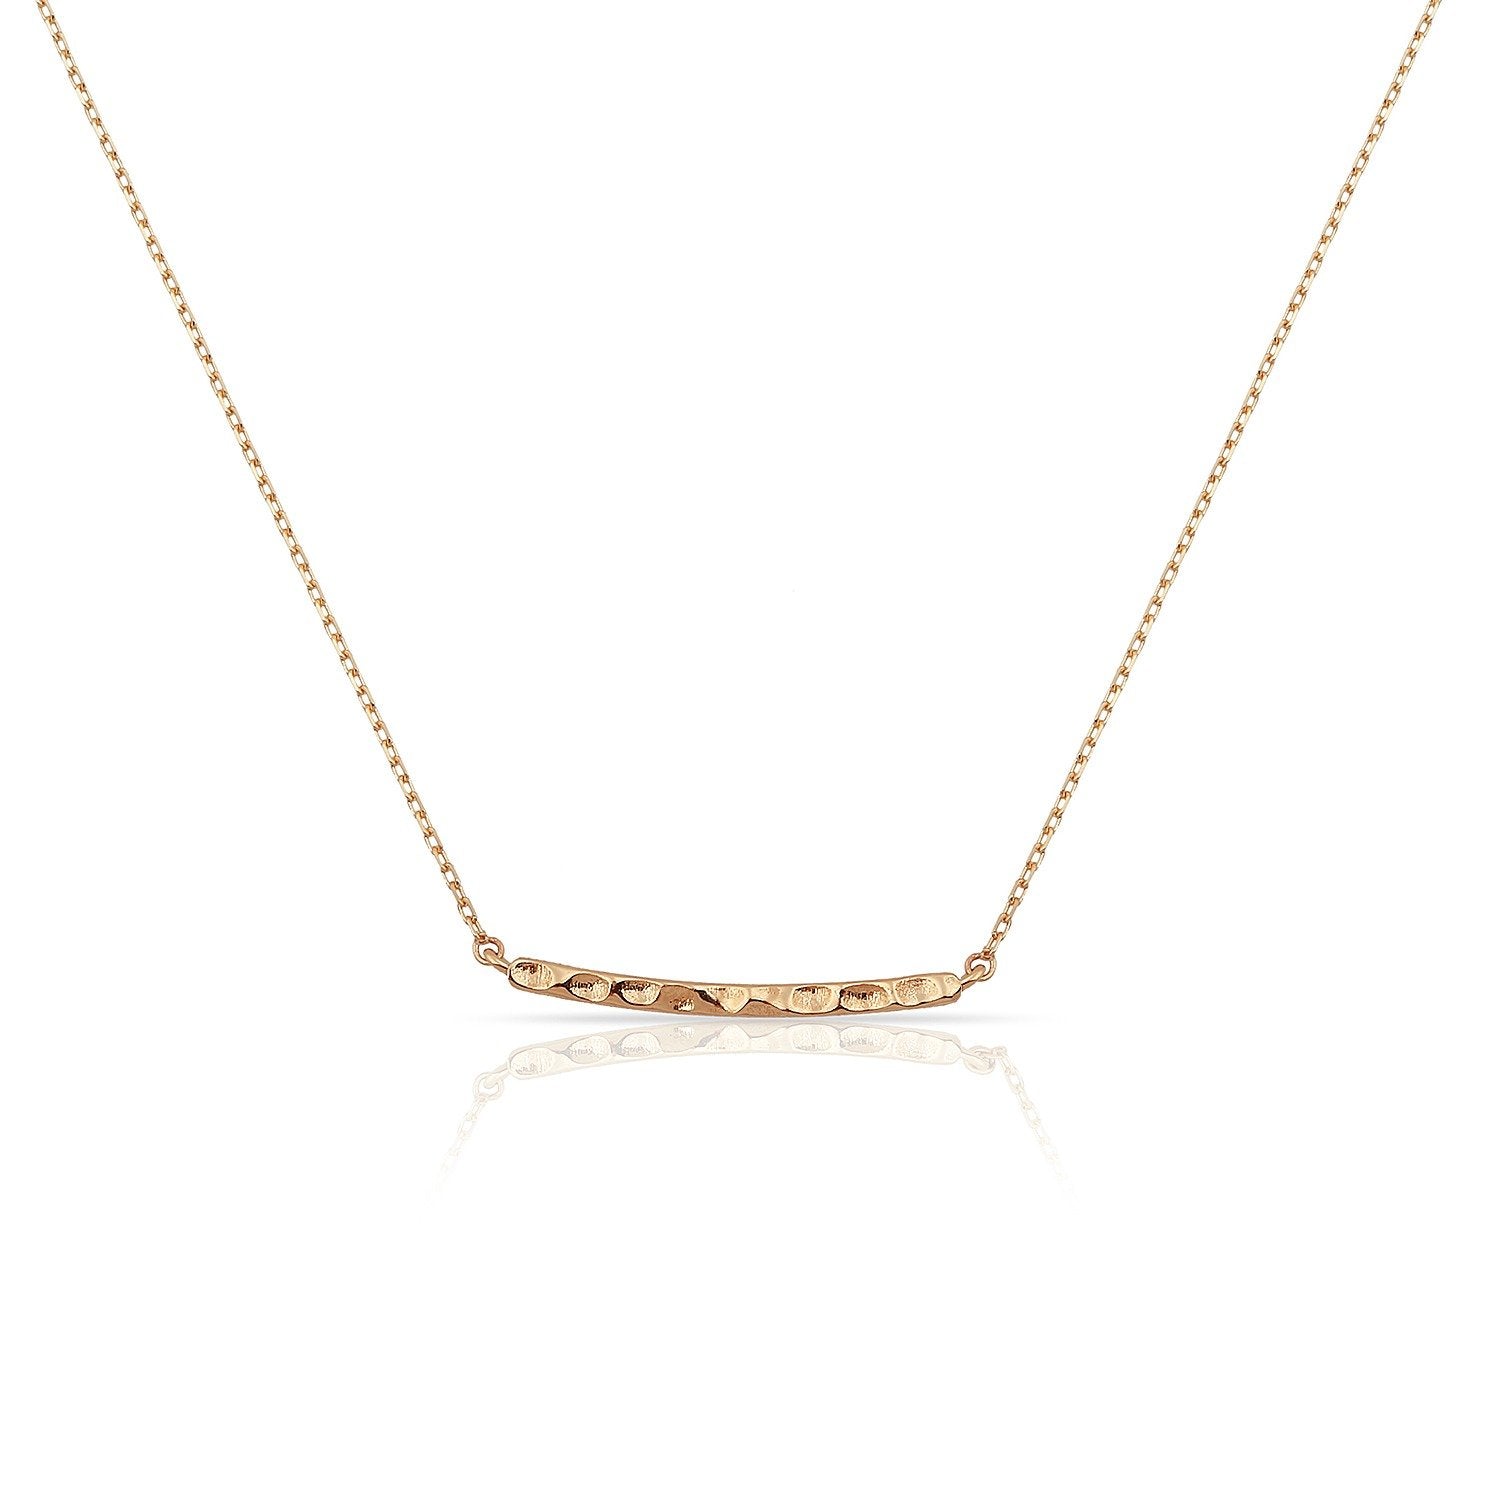 TSK Loverly Hammered Gold Bar Necklace JEWELRY The Sis Kiss 14k Rose Gold